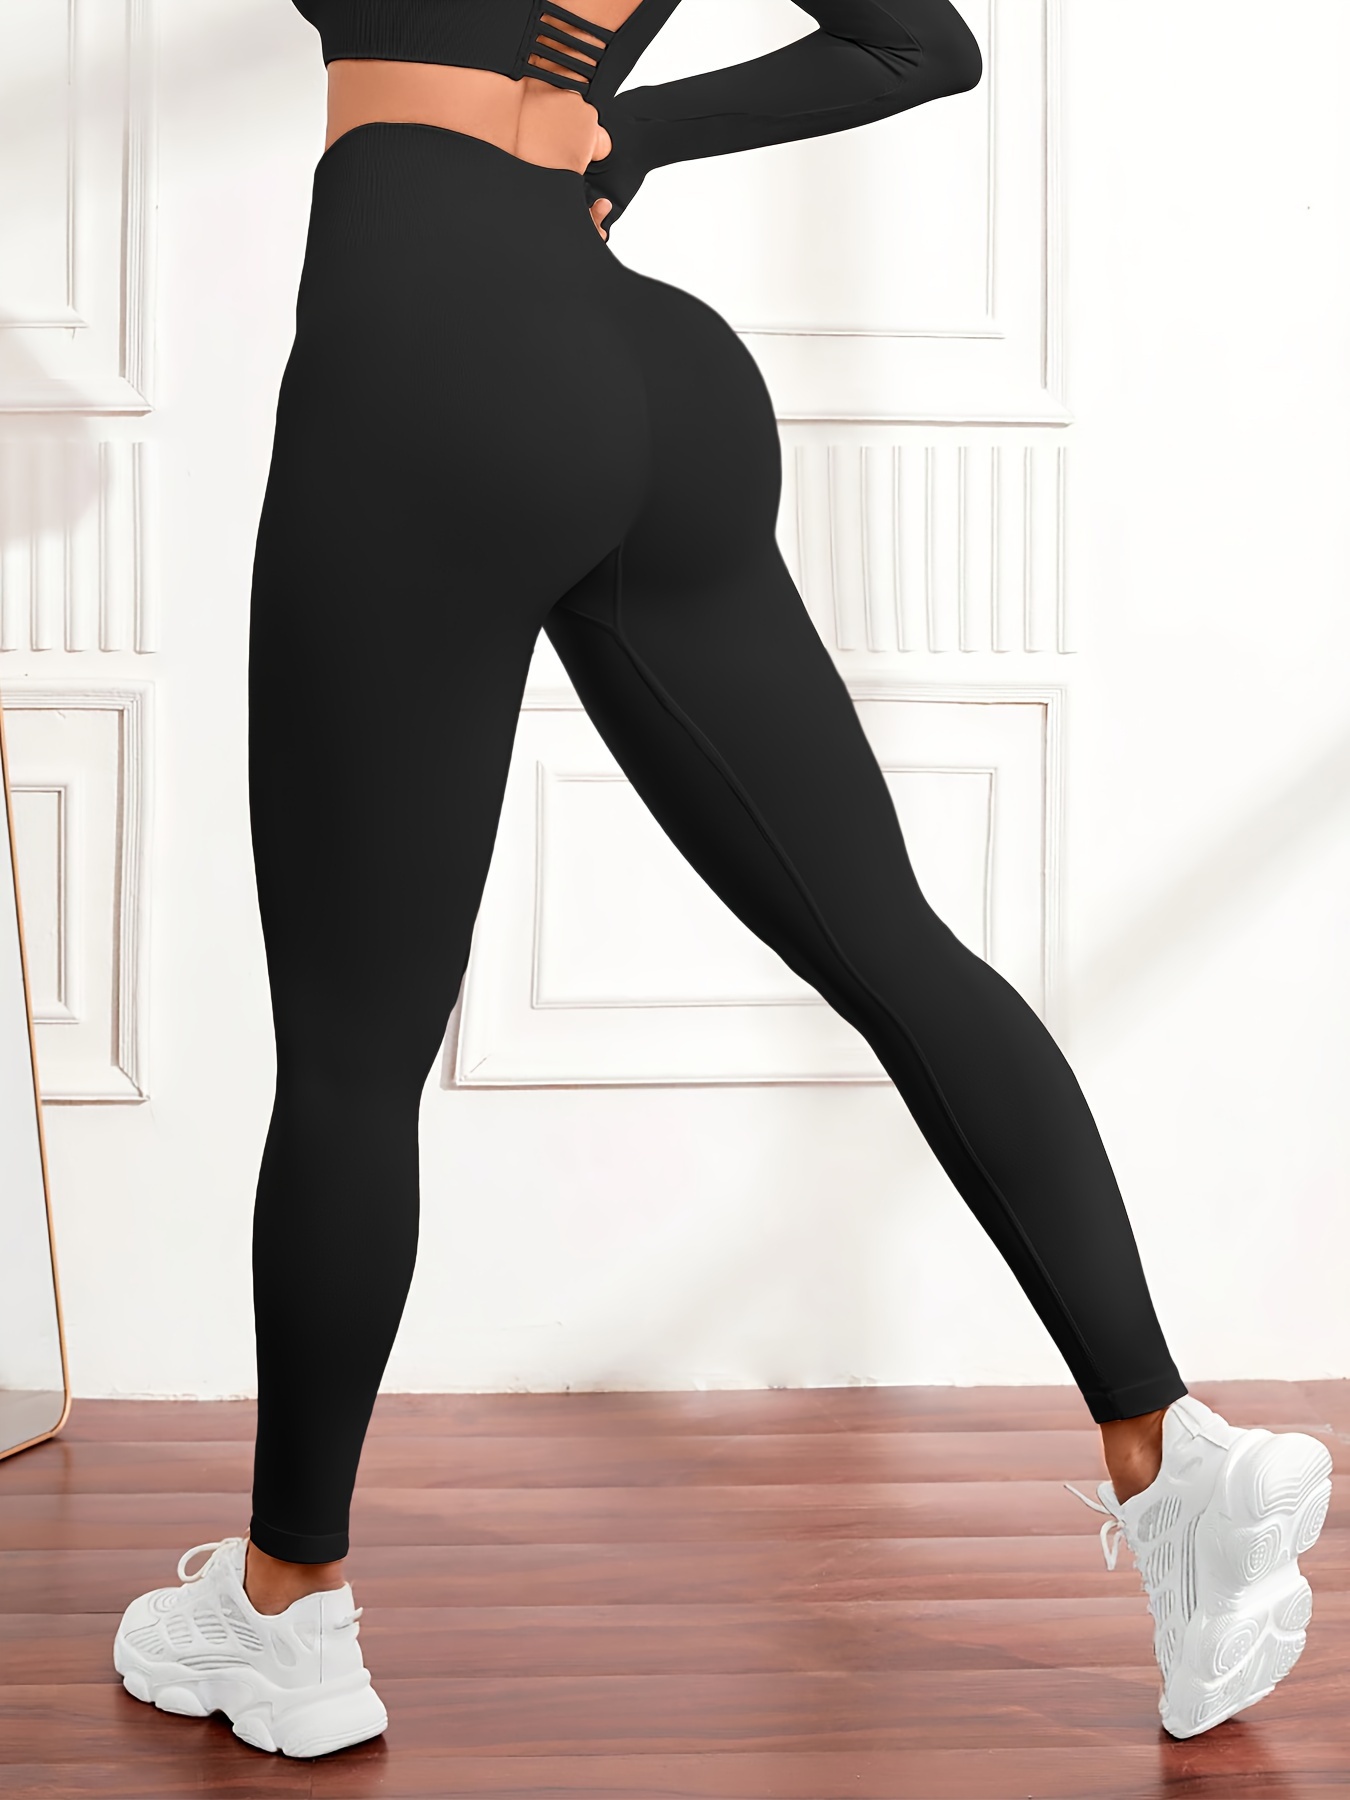 Black Lace Leggings Women Stretch Workout High Waisted Soft Casual Yoga  Pants Dressy Sexy Tummy Control Mesh Leggings at  Women's Clothing  store